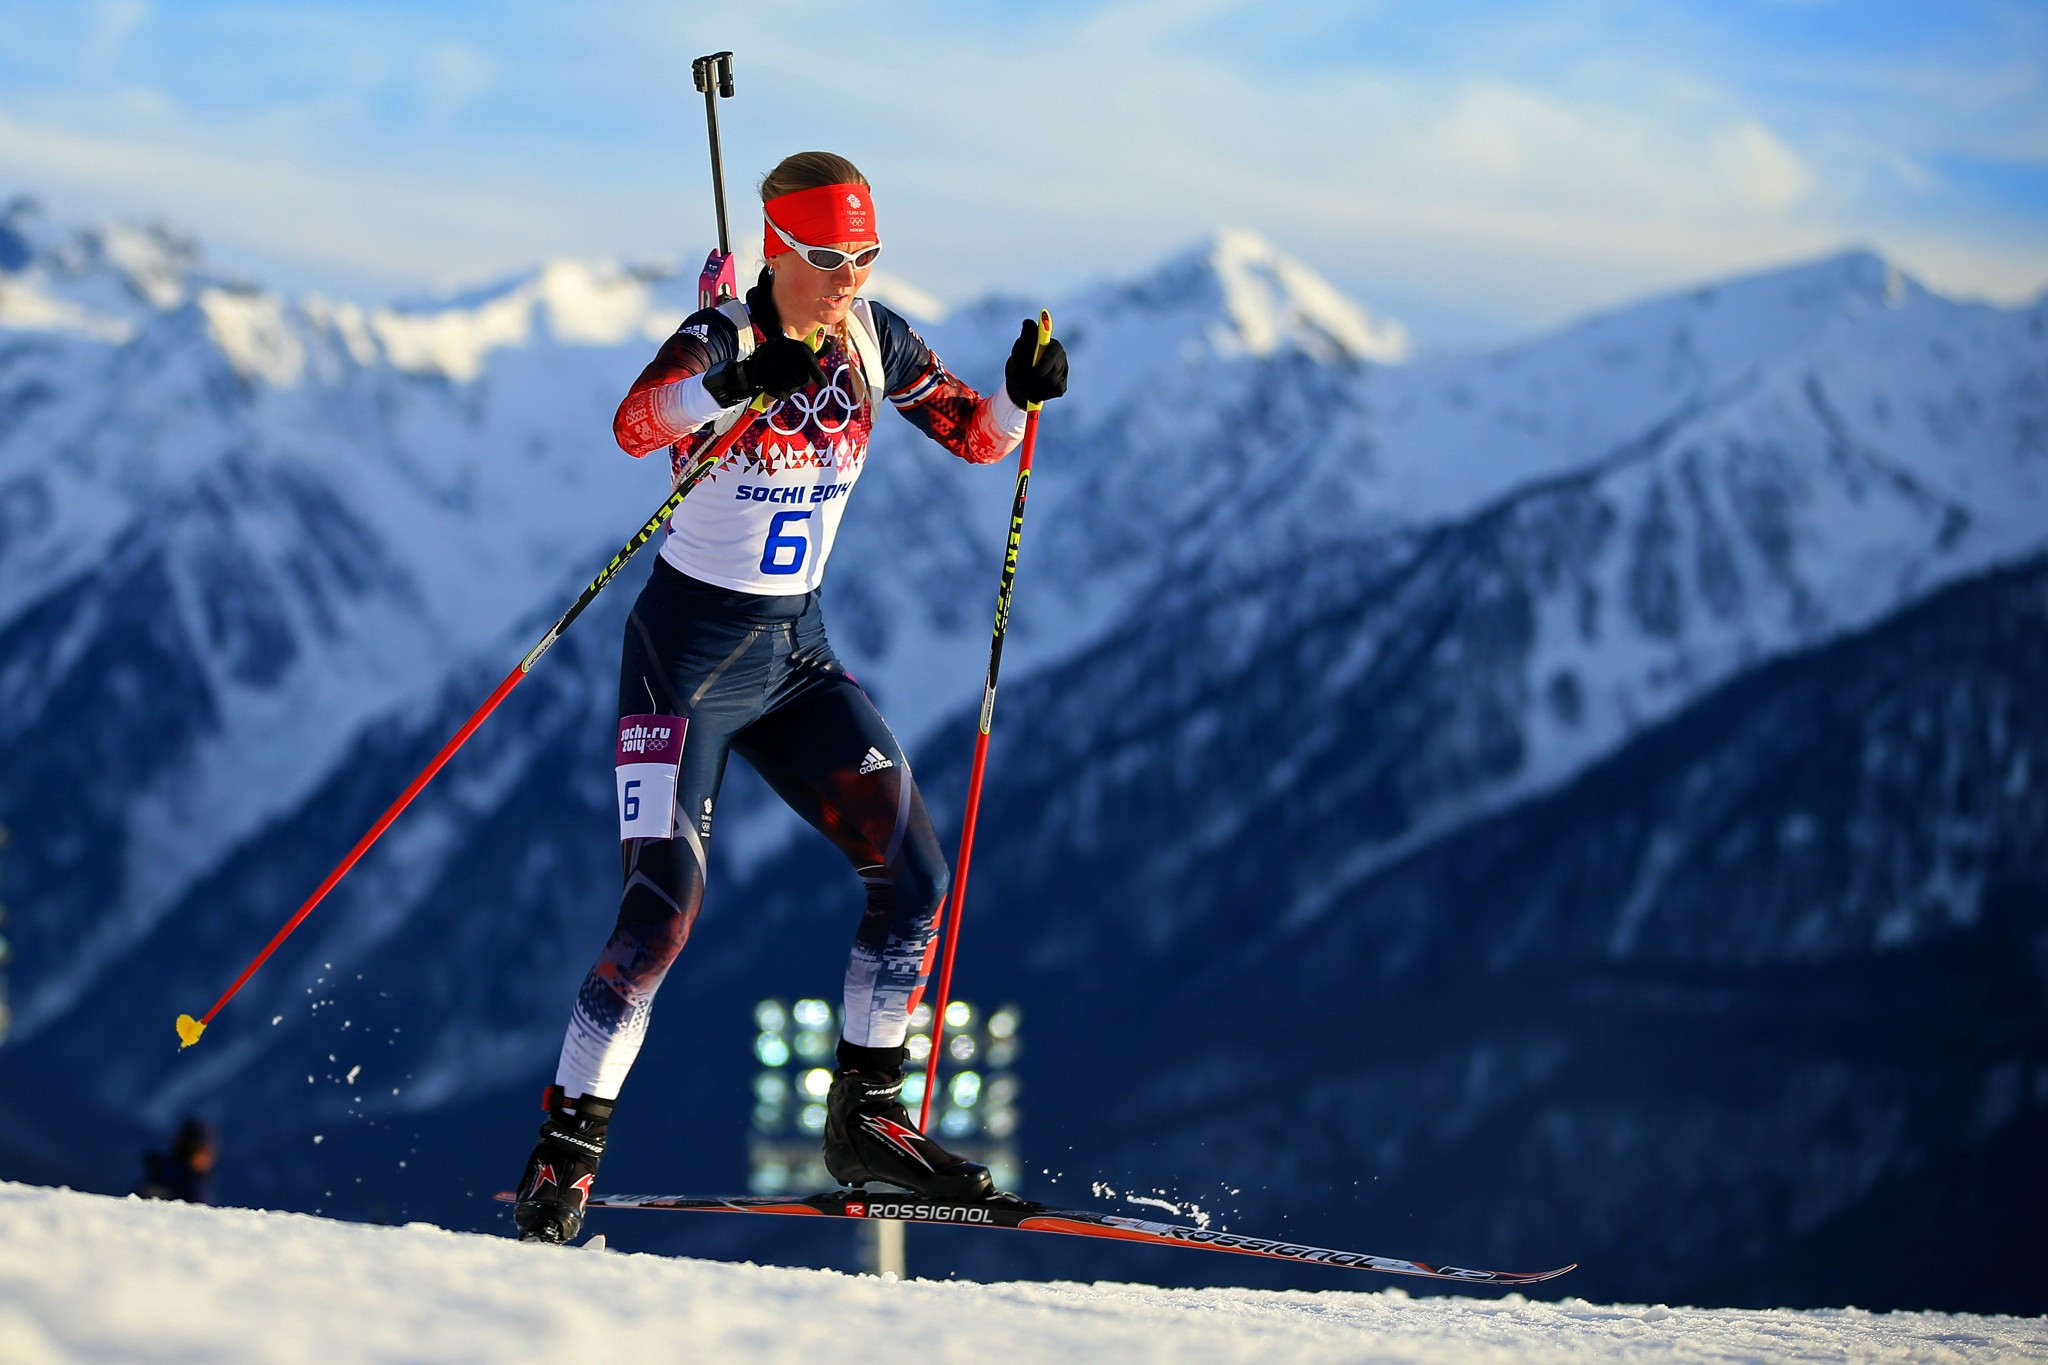 Amanda Lightfoot competed for Britain at Sochi 2014 and is set to qualify for Pyeongchang 2018 ©Getty Images